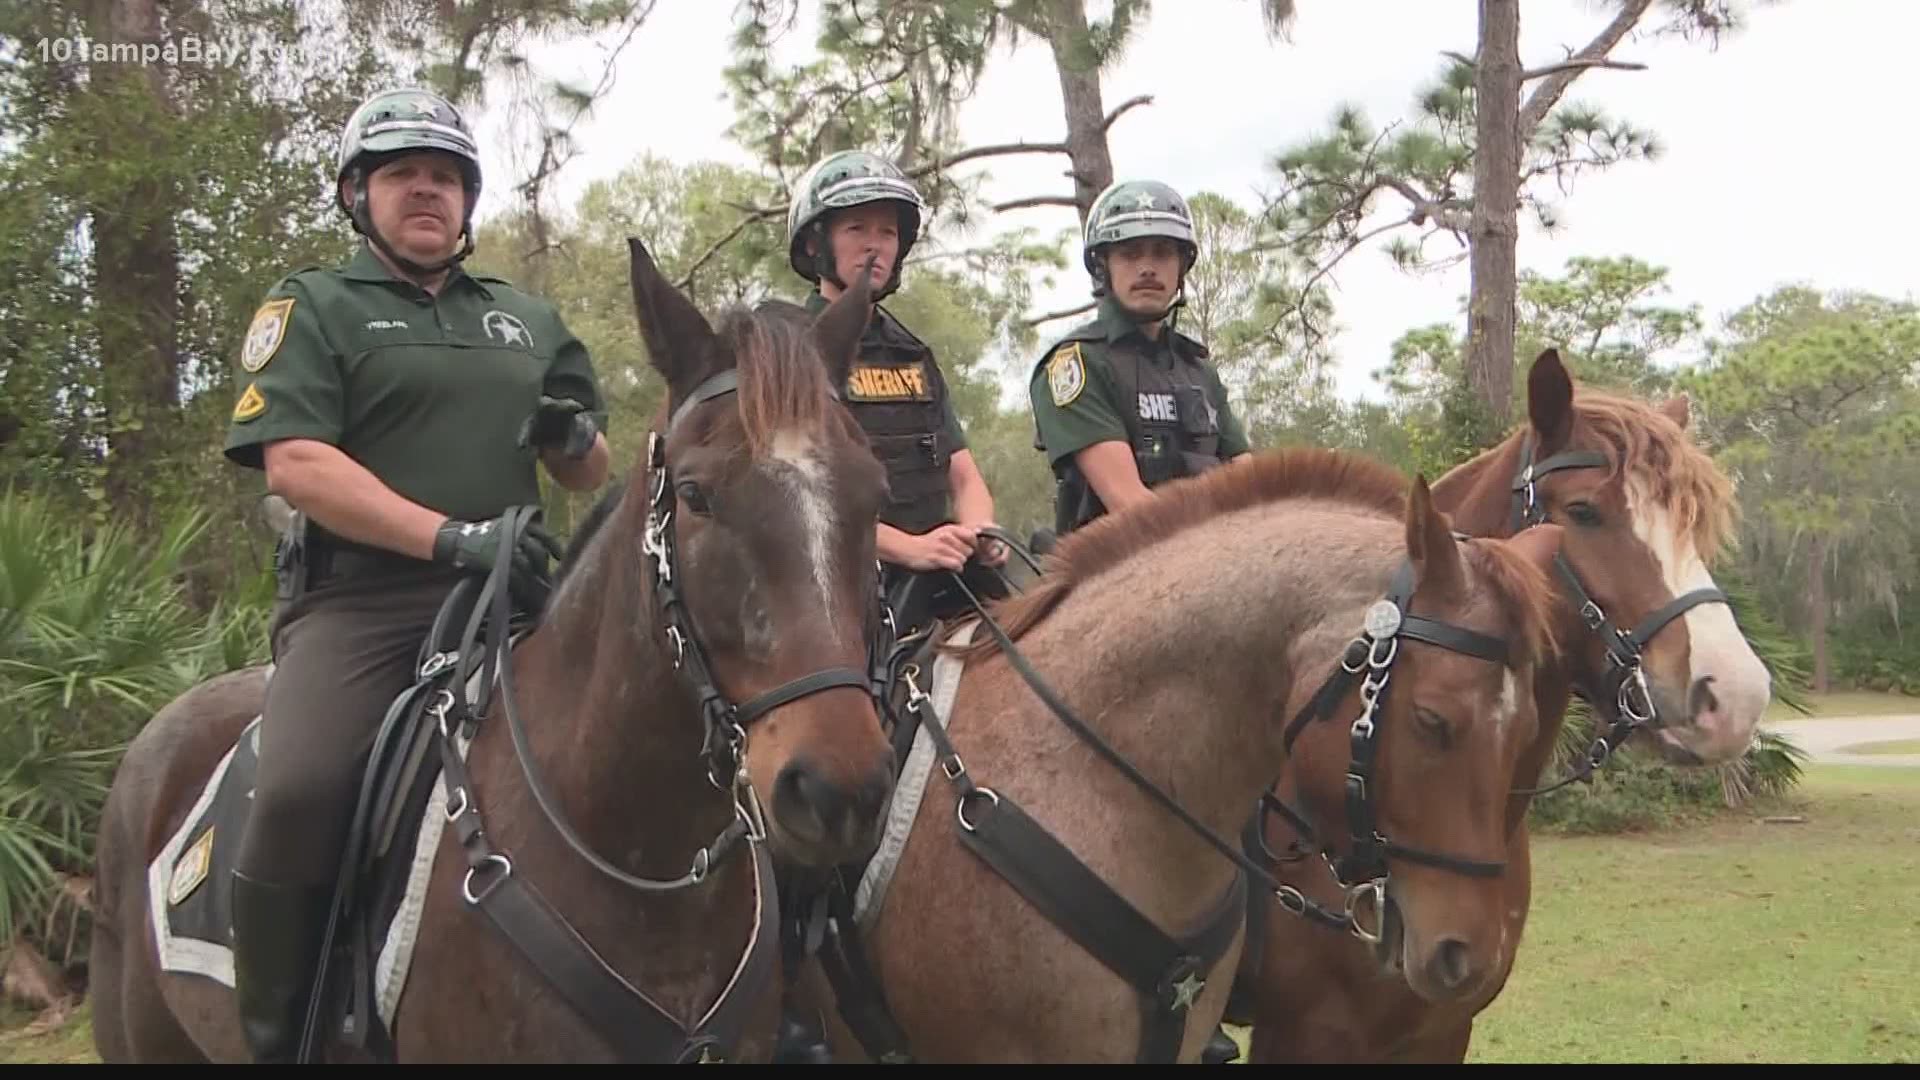 Local police are training horses ahead of the big game.